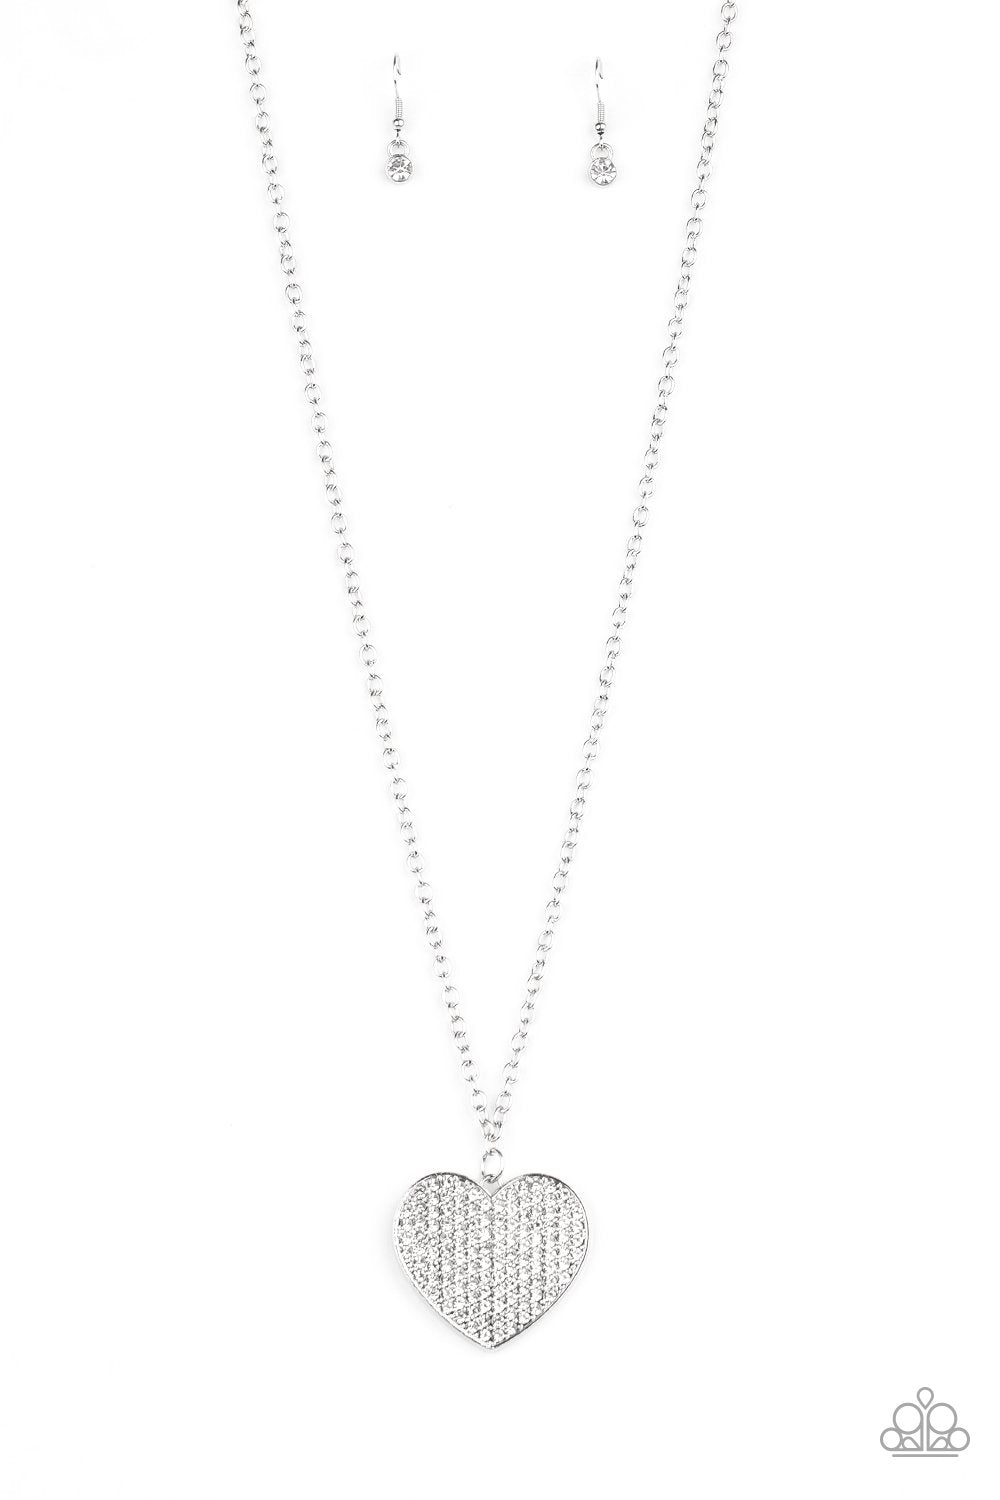 Have To Learn The HEART Way White Rhinestone Heart Necklace - Paparazzi Accessories-CarasShop.com - $5 Jewelry by Cara Jewels